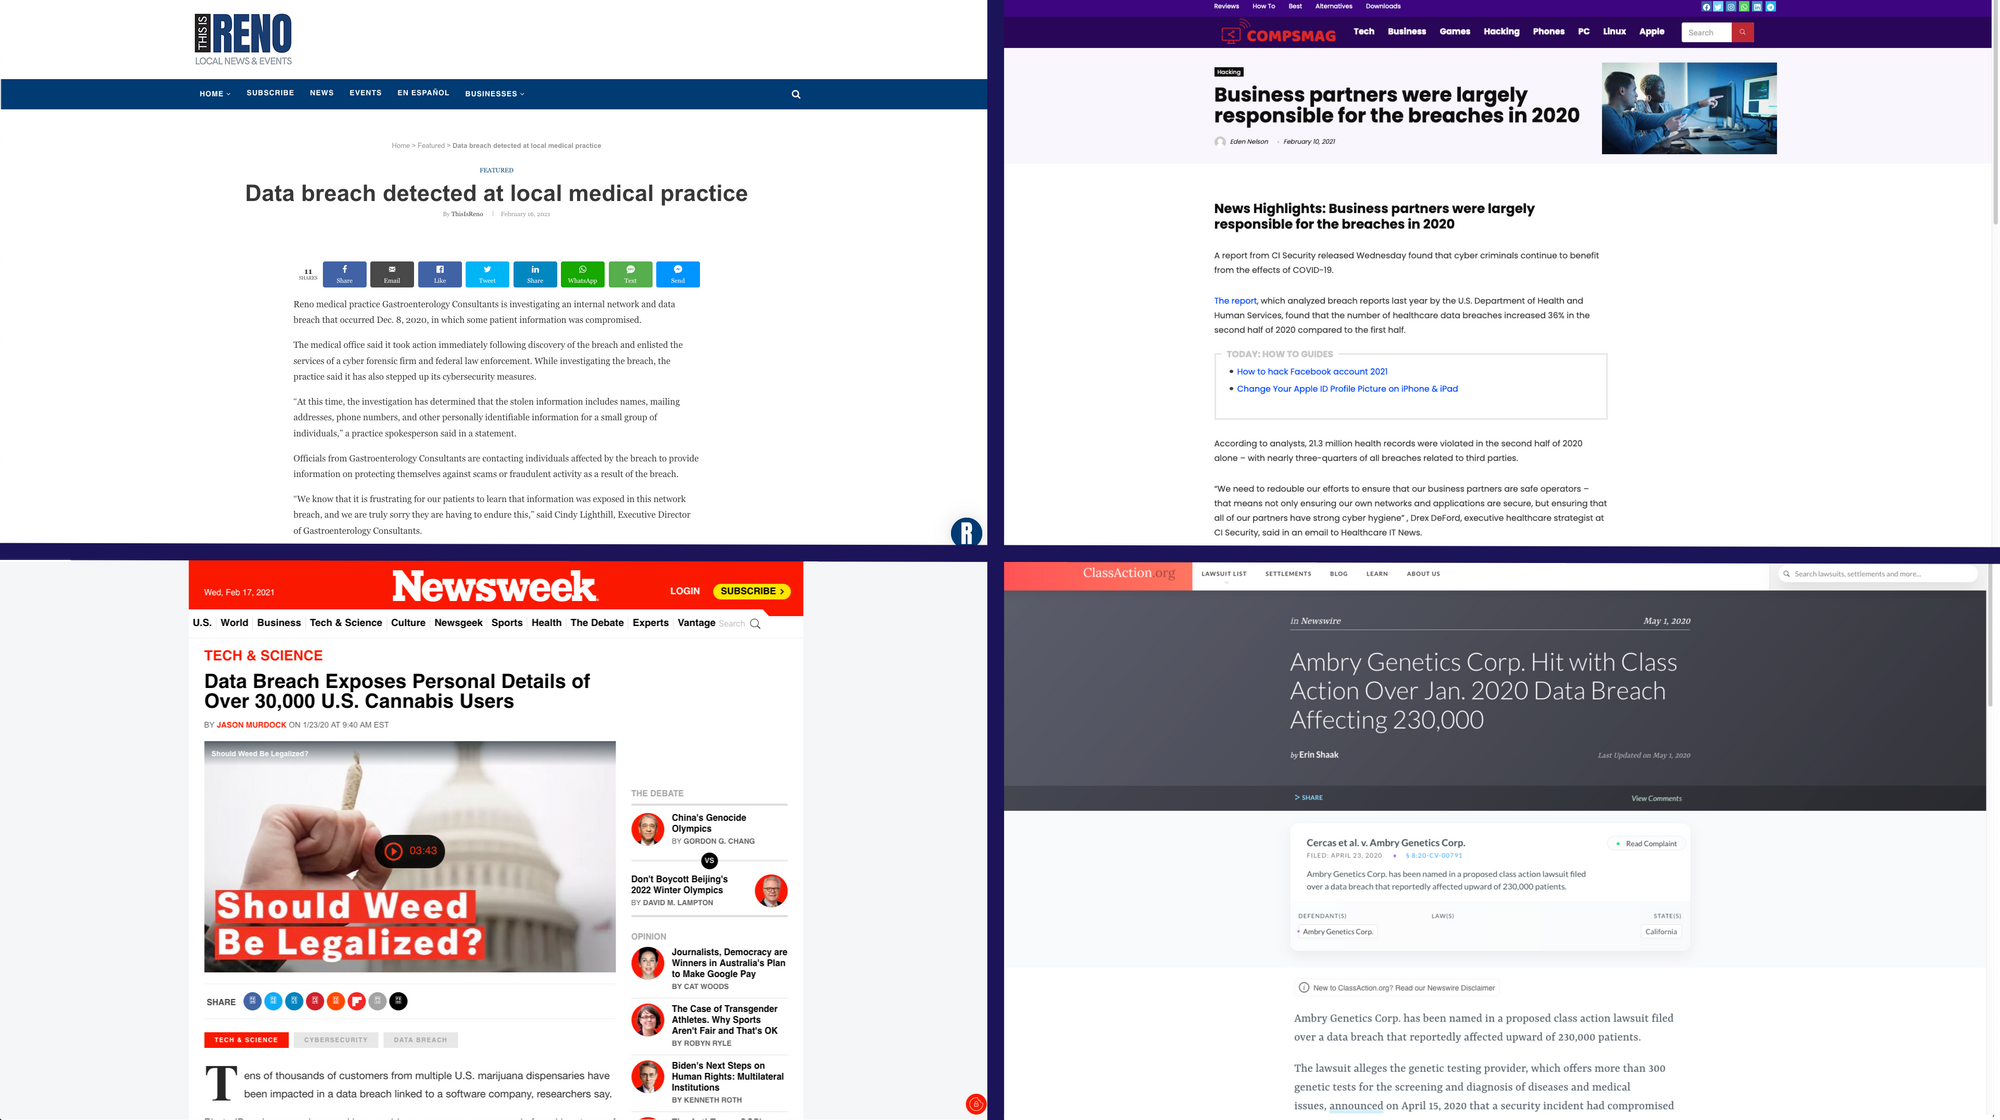 News panel of articles showing data breaches (clockwise from top left): "Data breach detected at local medical practice" (This is Reno), "Business partners were largely responsible for the breaches in 2020" (compsmag), "Data breach exposes personal details of over 30k US cannabis users" (Newsweek), "Ambry Genetics Corp hit with class action over 2020 data breach" (ClassAction.org).